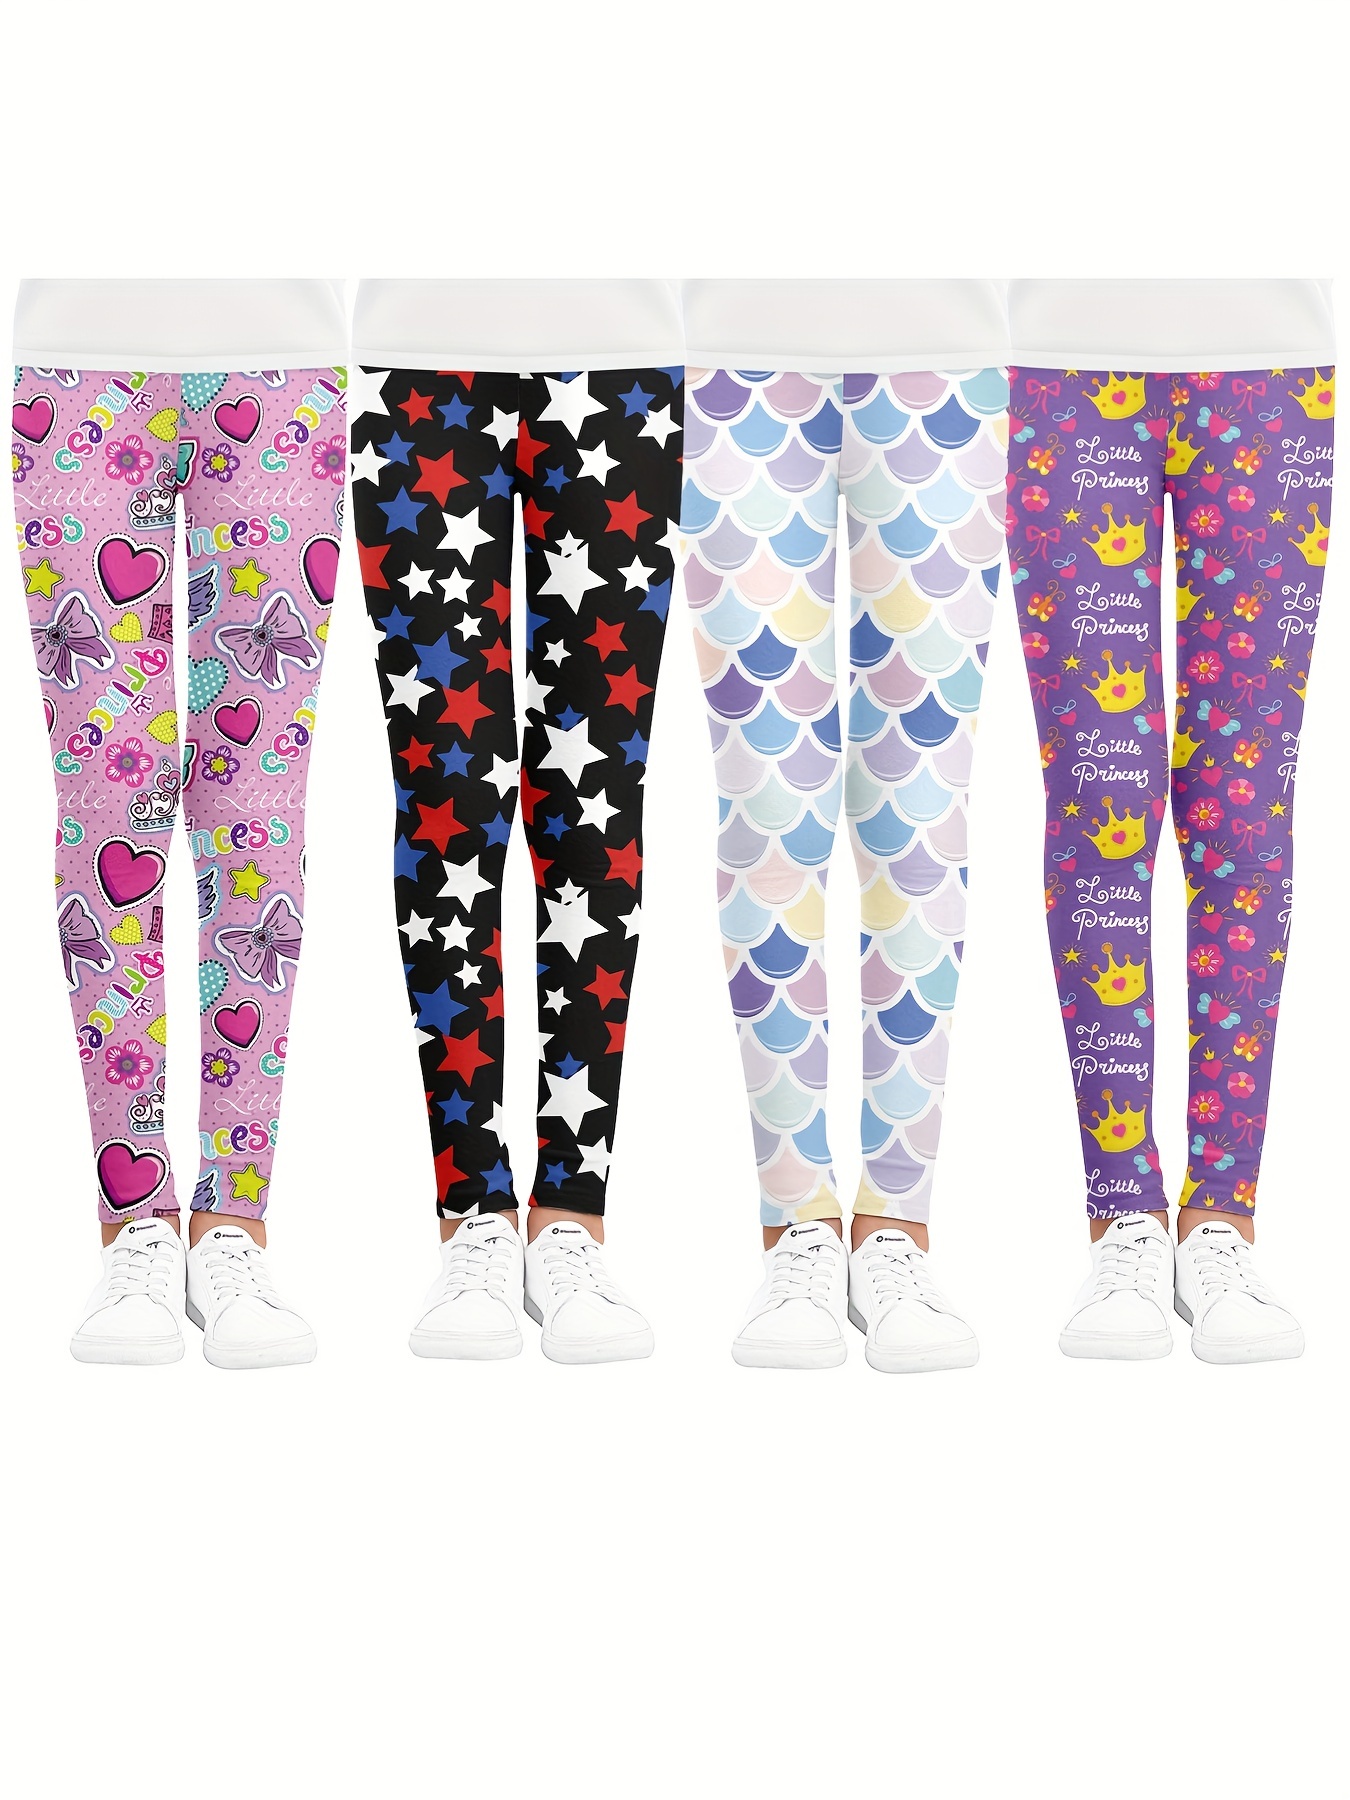 Princess Sketches Theme Park Inspired Leggings in Capri or Full Length,  Sports Yoga Winter Styles in Sizes XS 5XL 